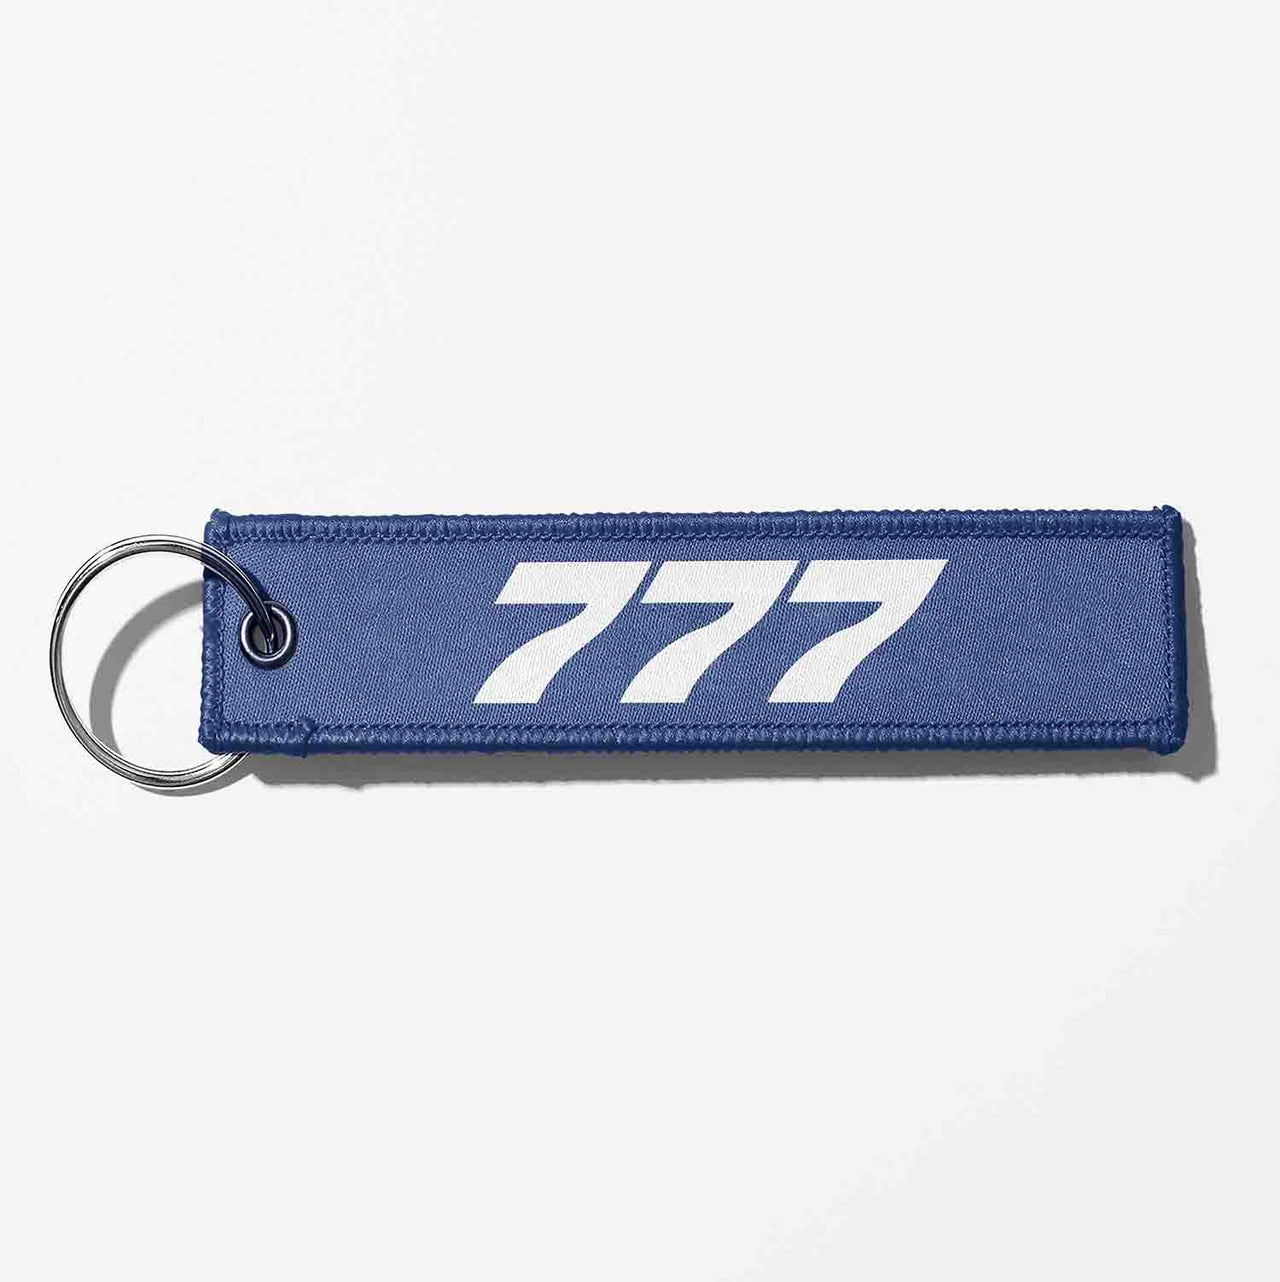 Boeing 777 Flat Text Designed Key Chains